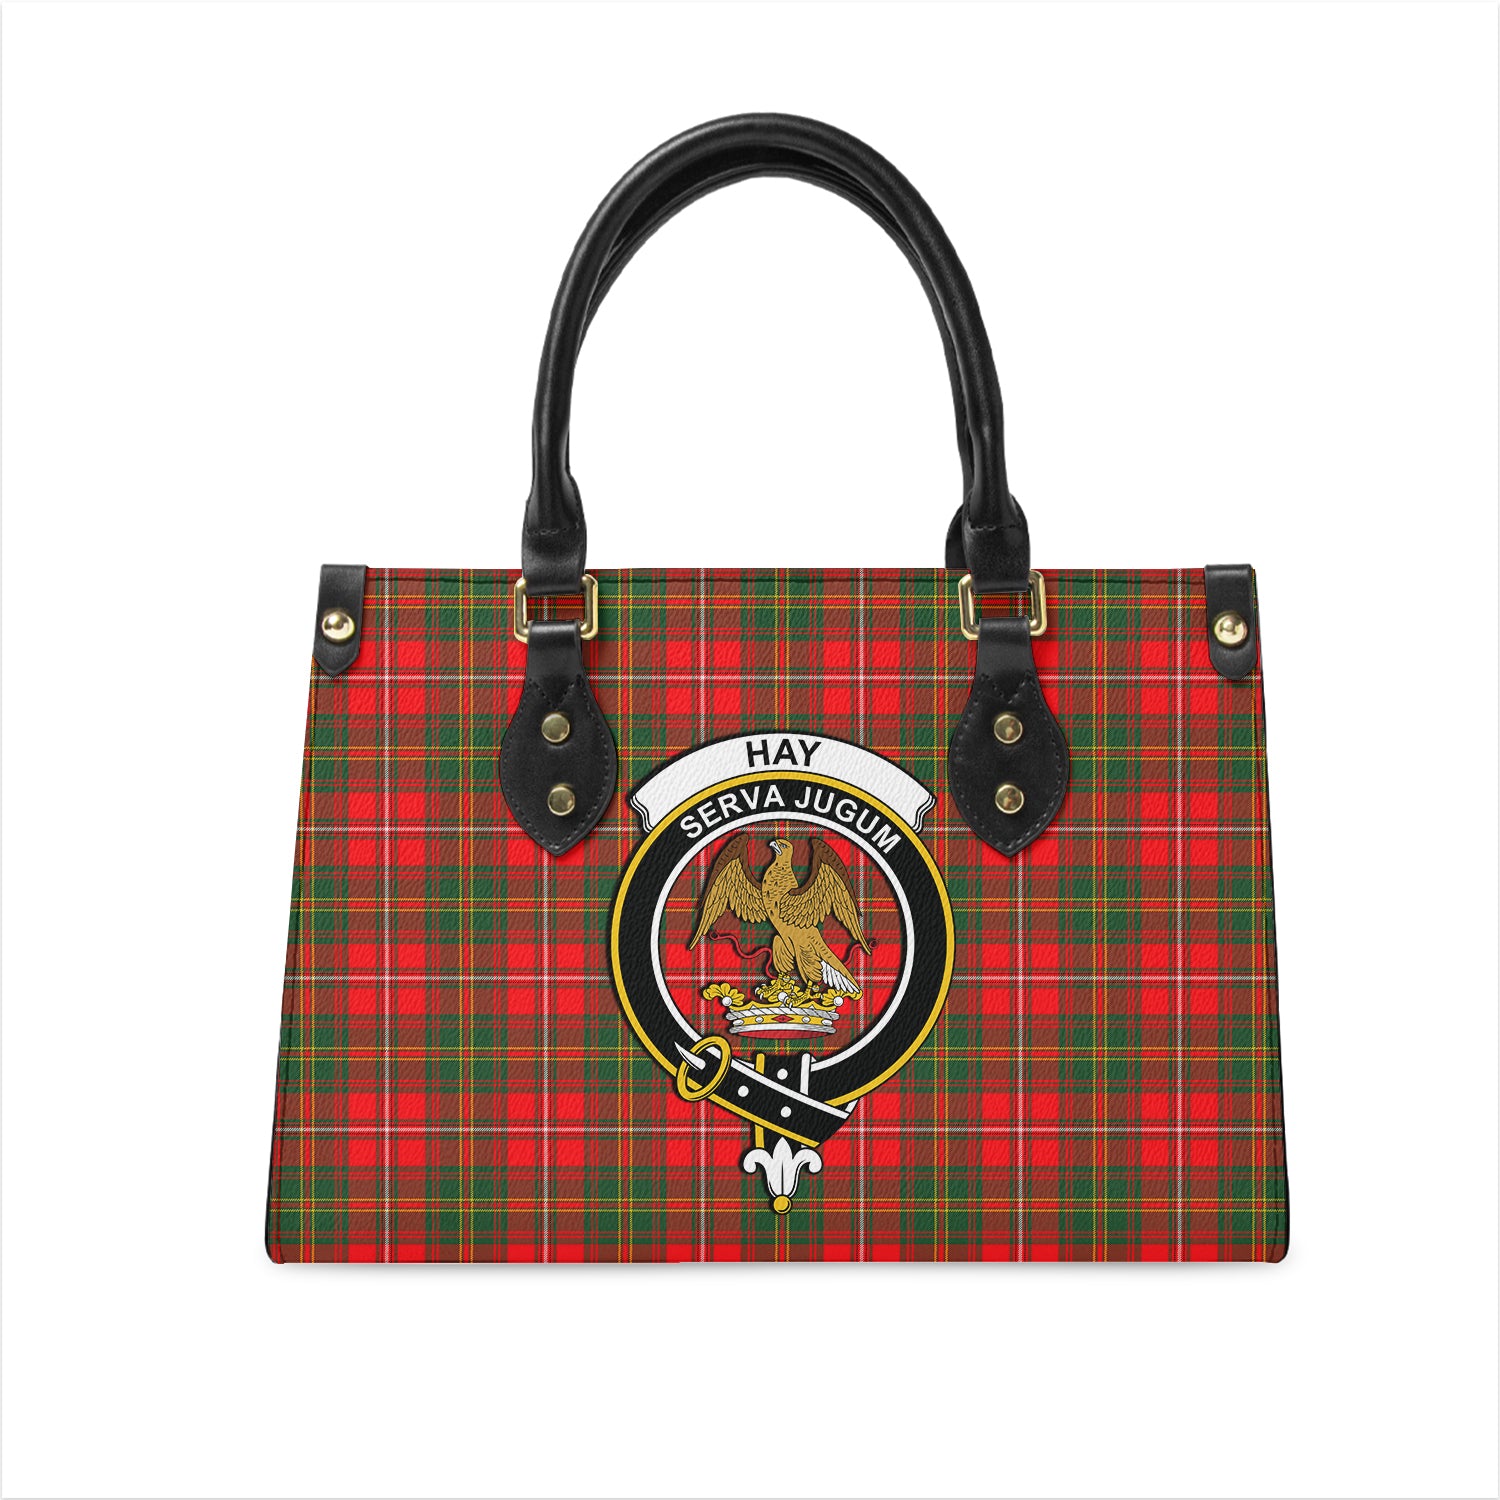 hay-modern-tartan-leather-bag-with-family-crest